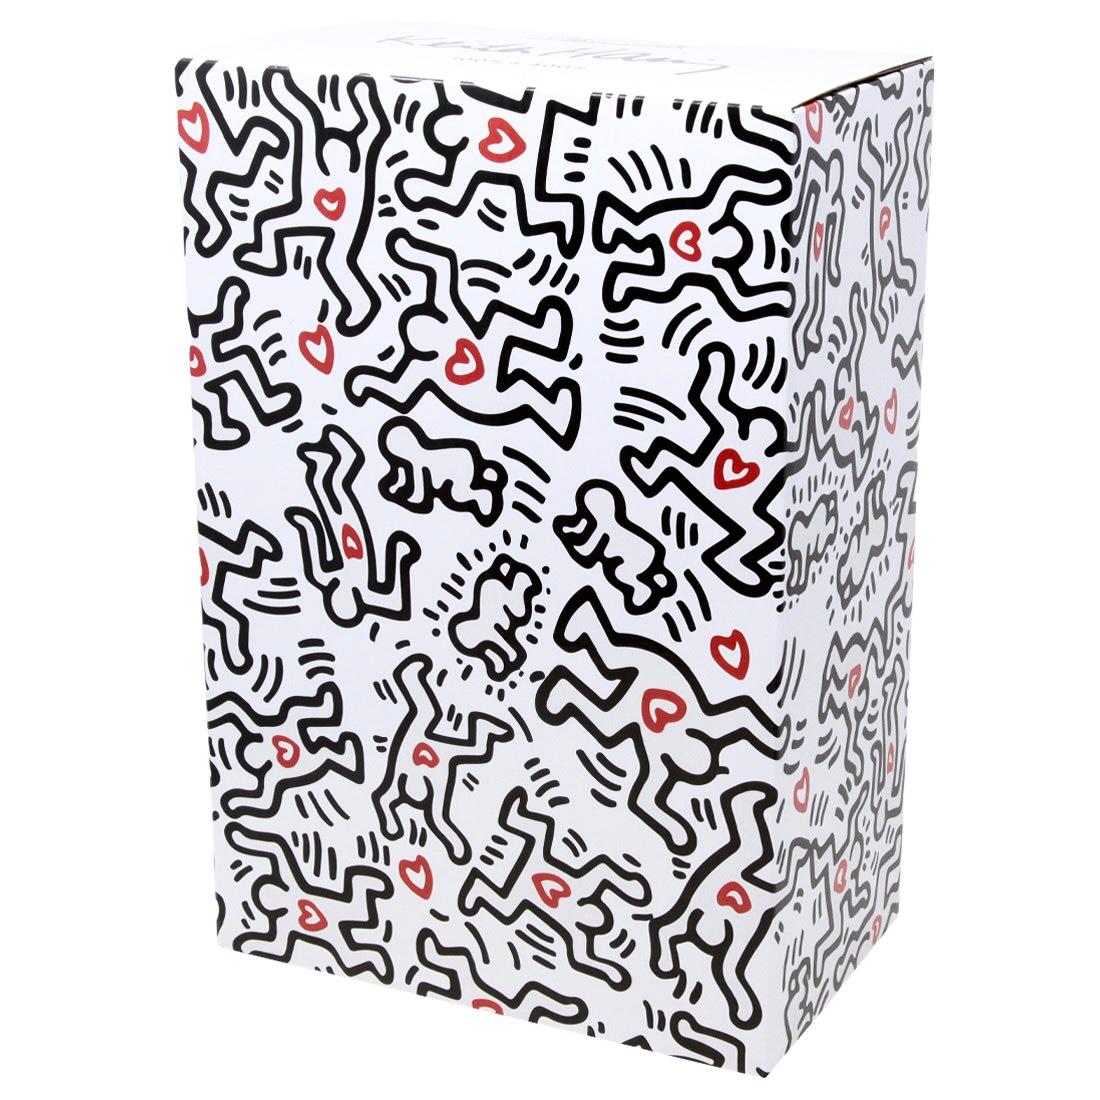 Keith Haring Bearbrick 400%  (Keith Haring BE@RBRICK)  - Pop Art Print by (after) Keith Haring